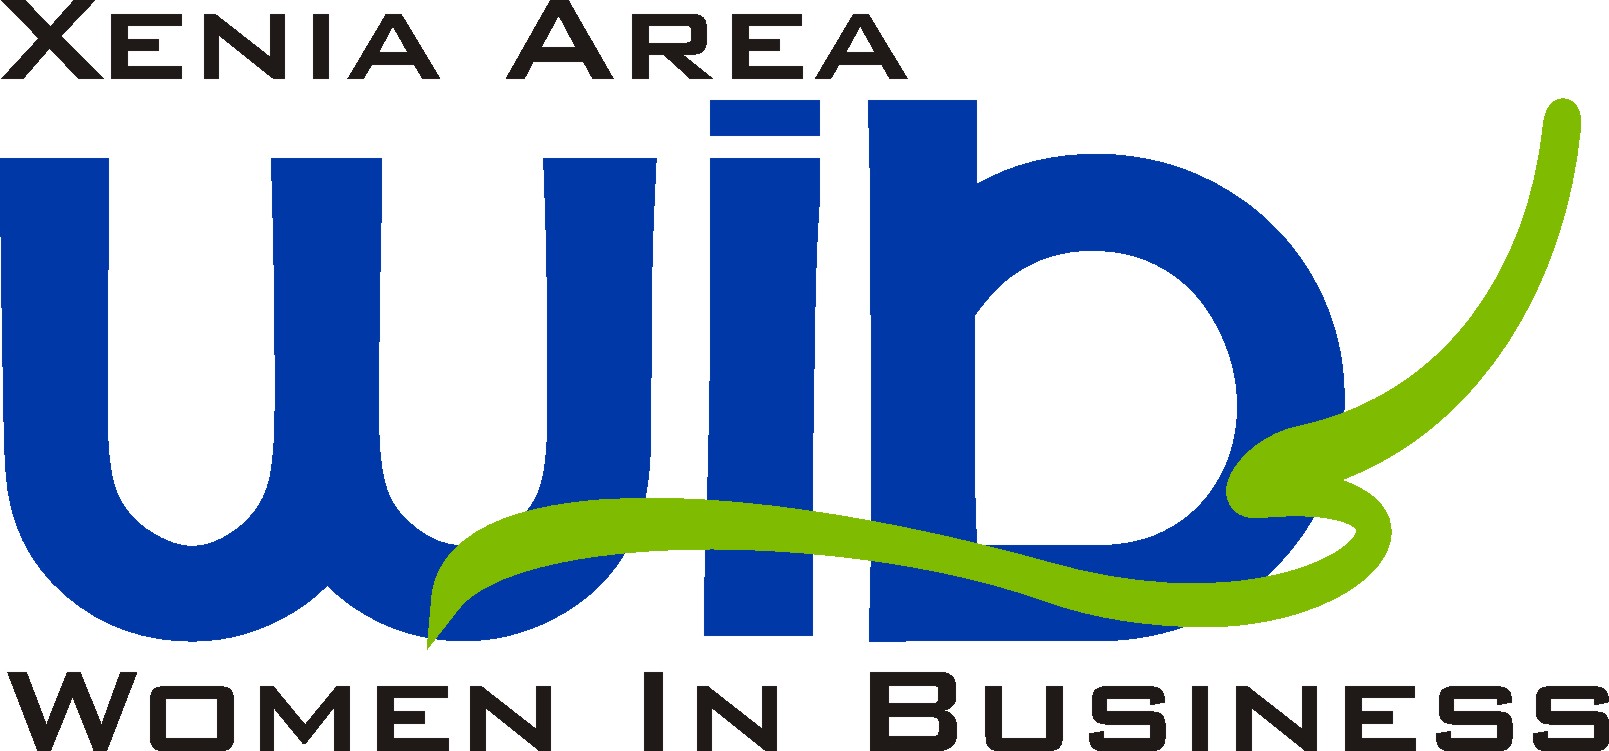 Janice Atwater to Speak at February 20th Women In Business about 2020 Census Updates